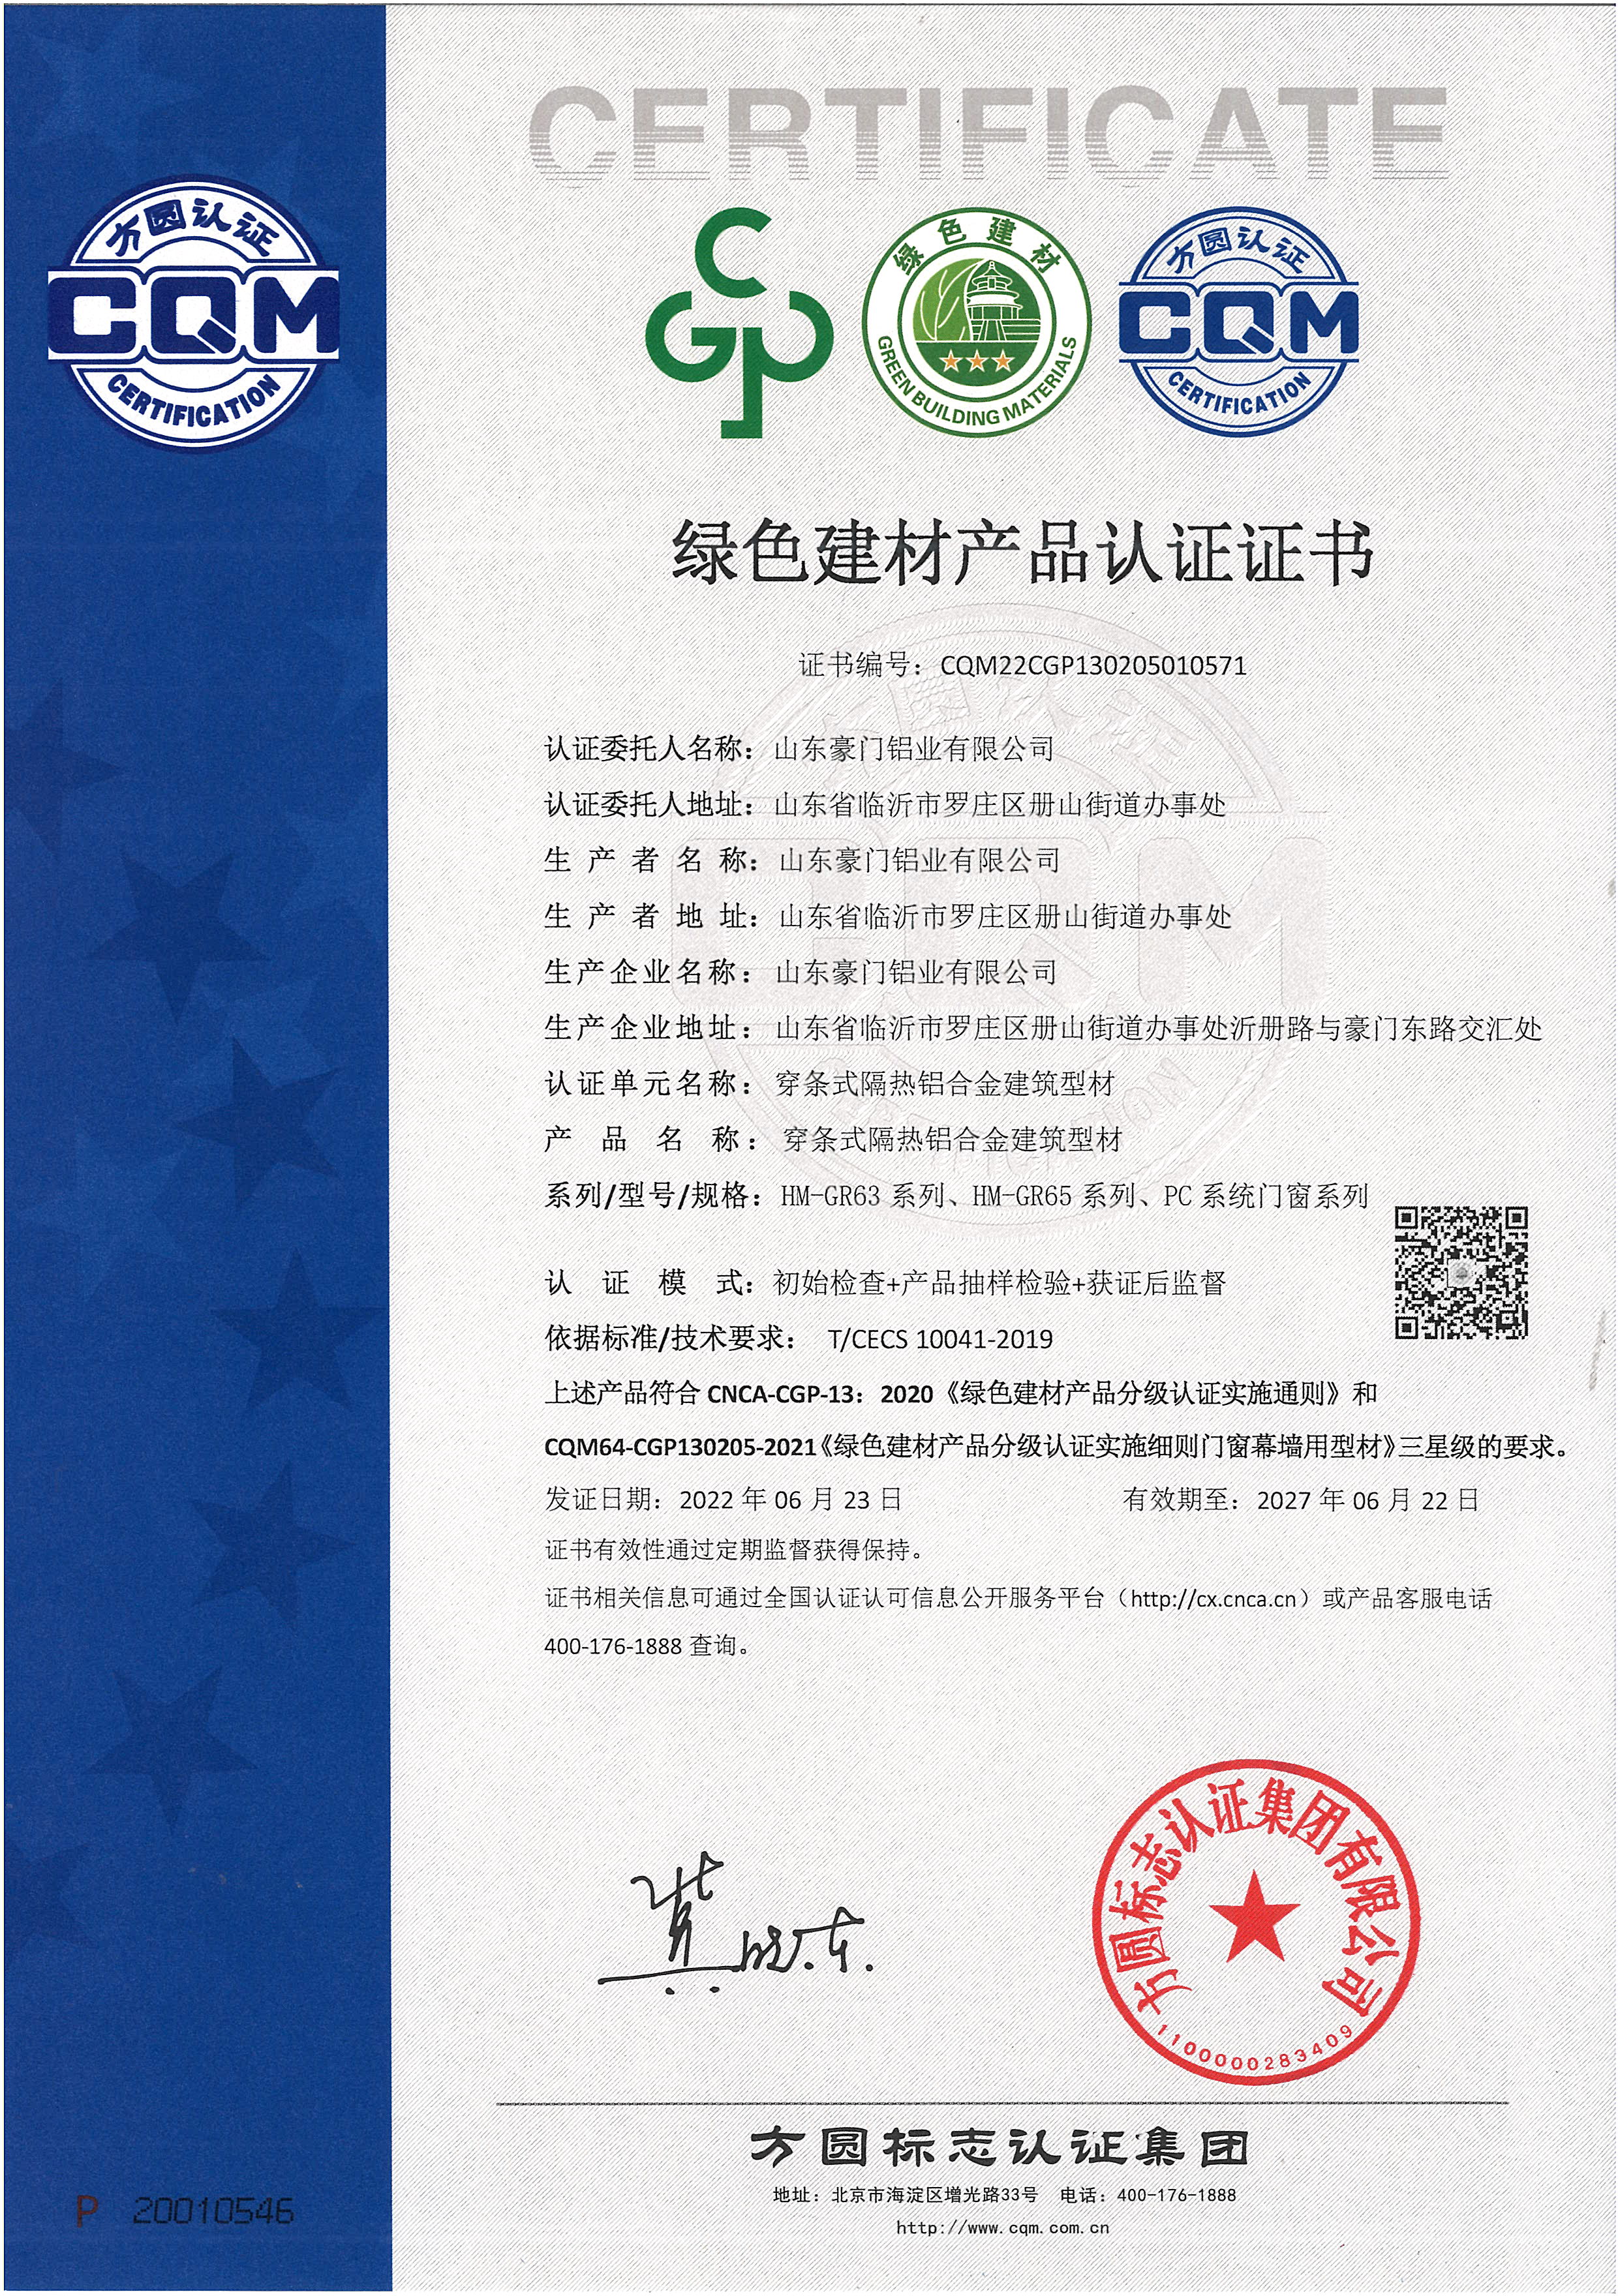 Certification of green building materials products